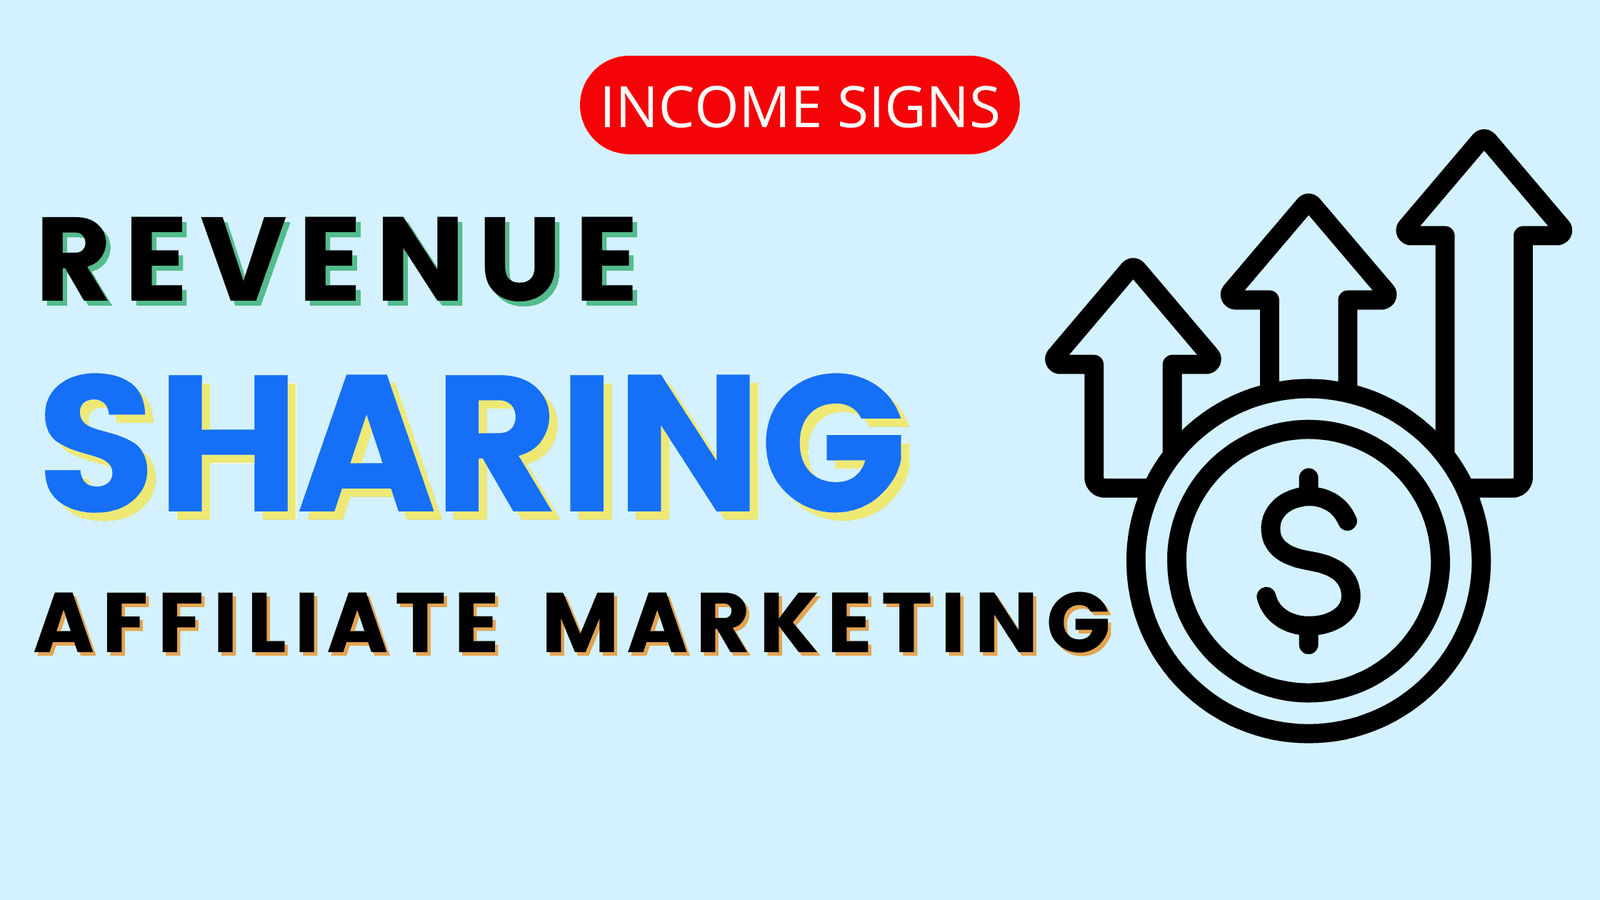 What is Revenue sharing in Affiliate Marketing?